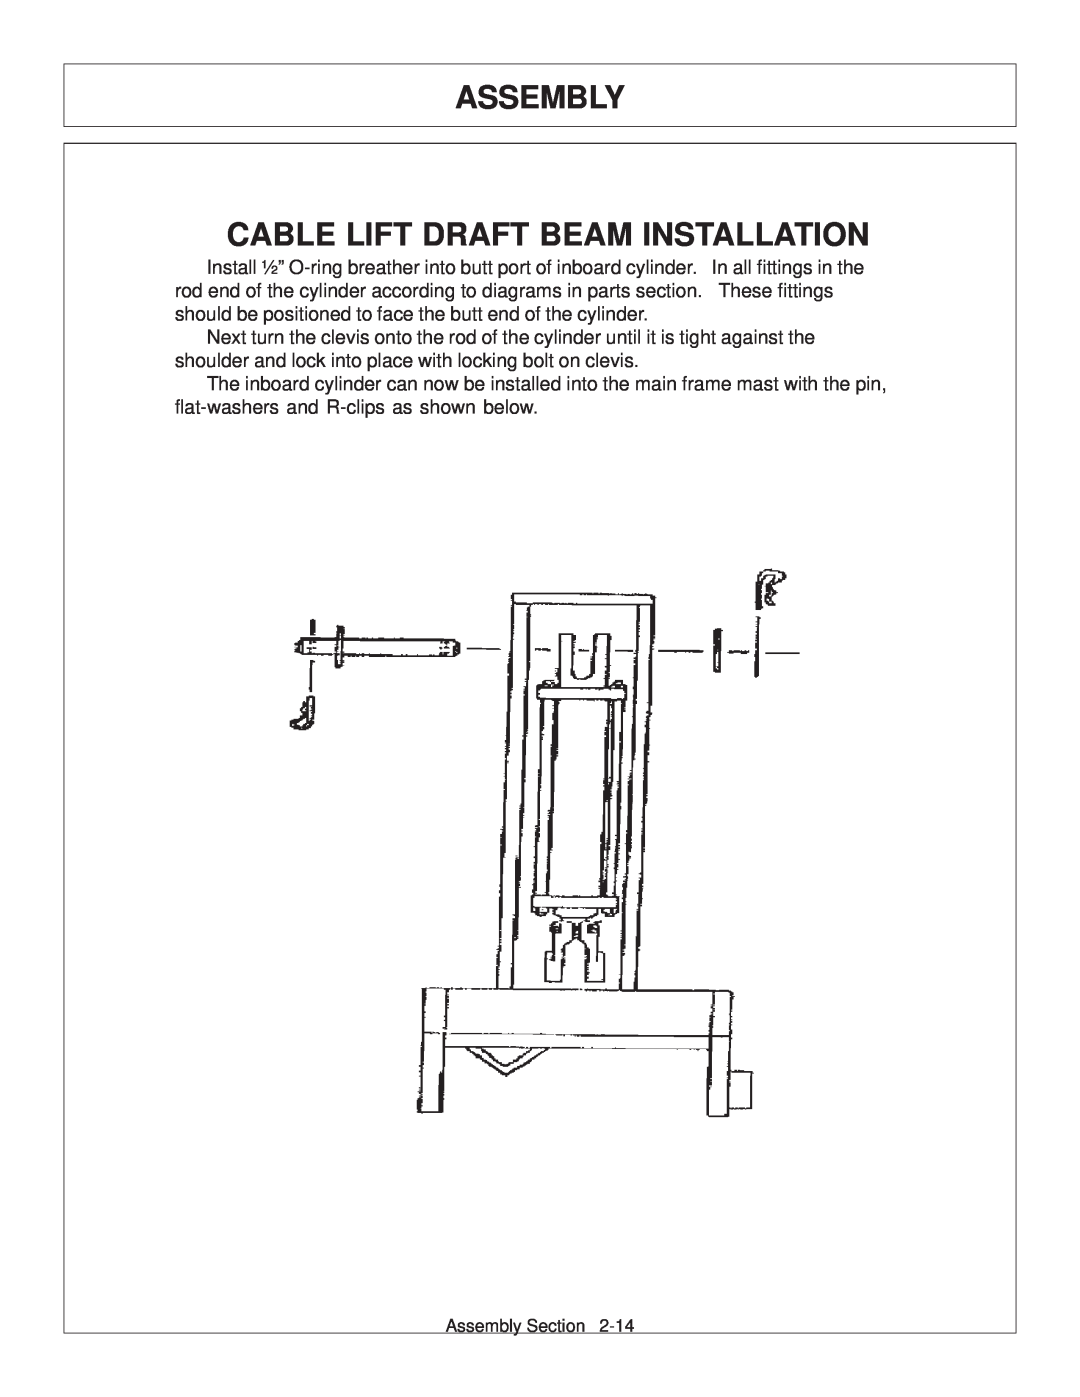 Tiger Products Co., Ltd 6020009 manual Cable Lift Draft Beam Installation, Assembly 